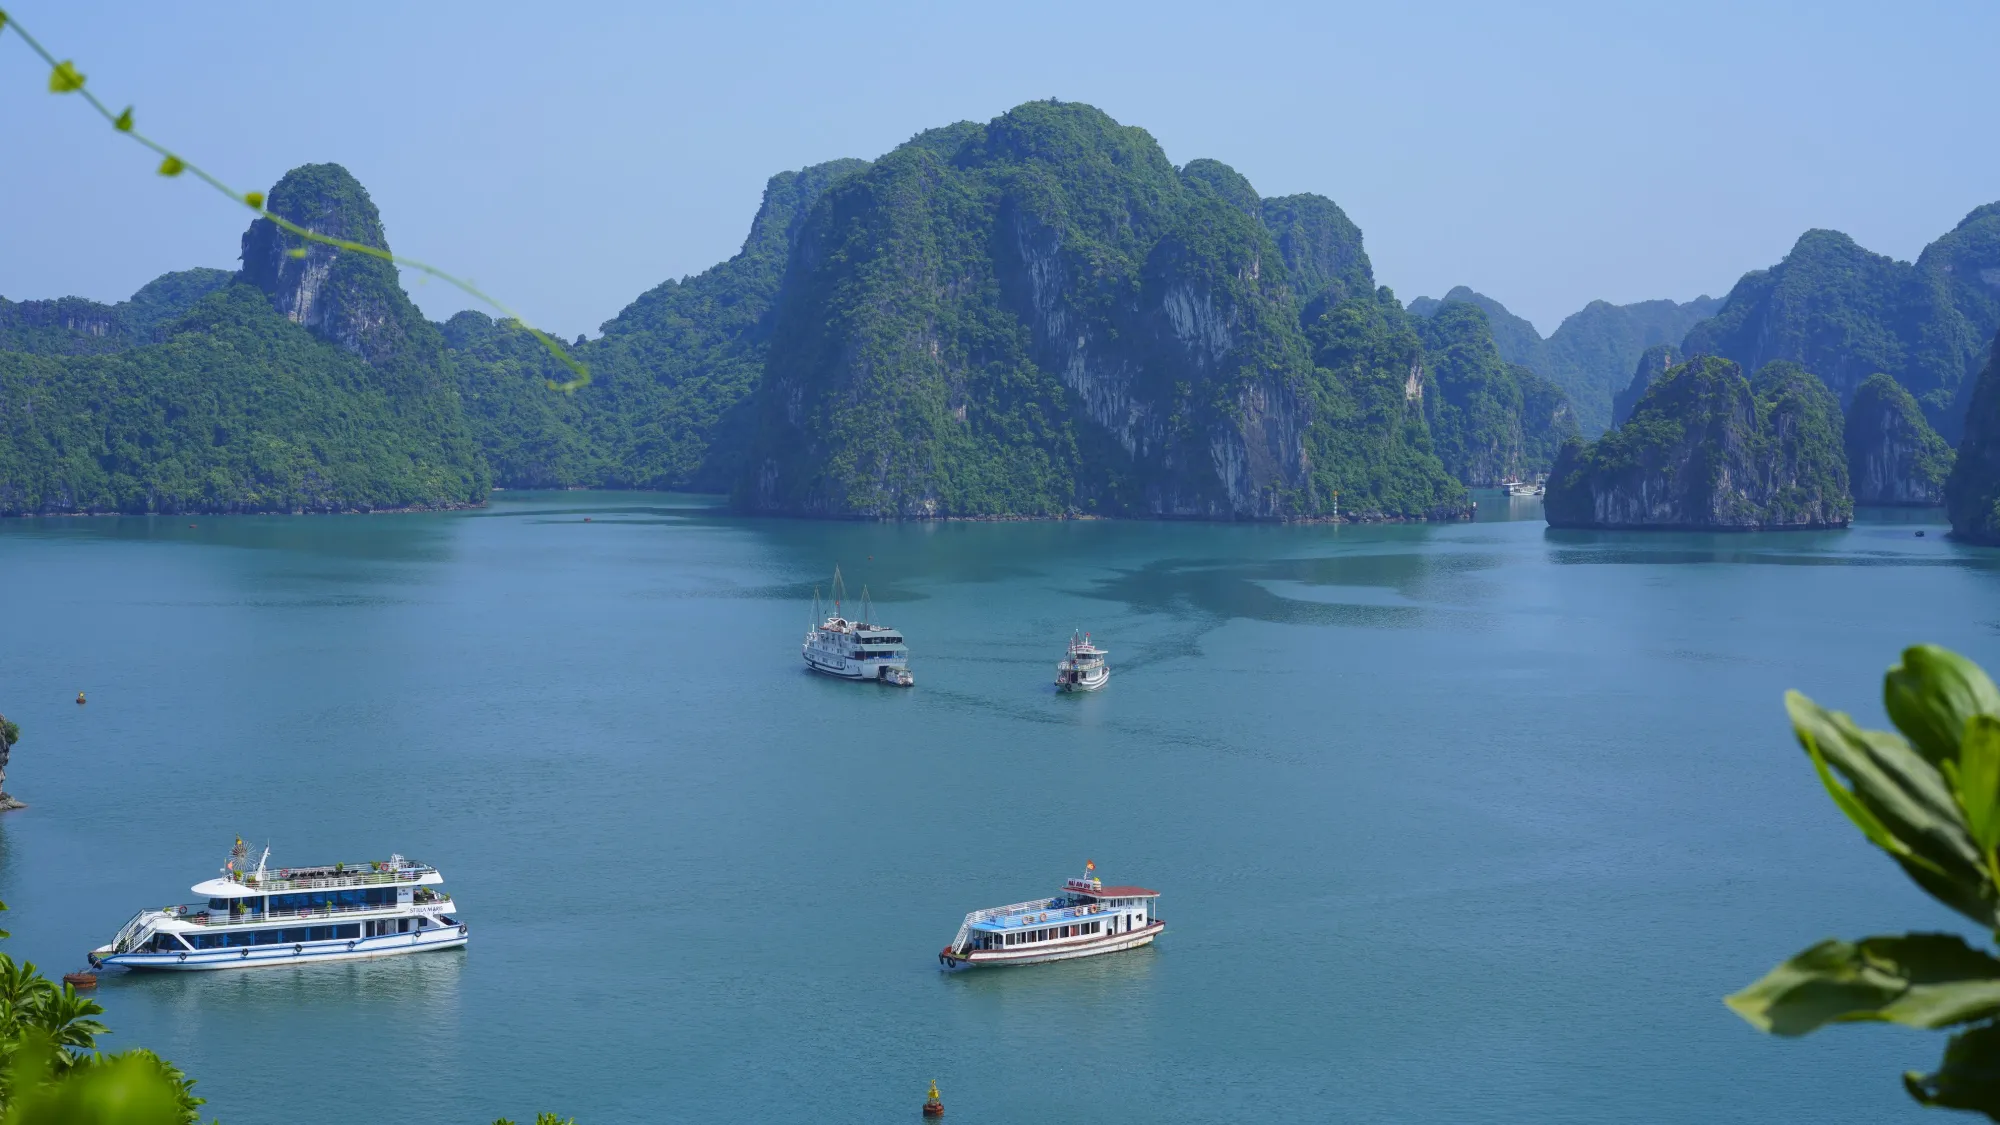 Ha Long Bay islands and boats shot from the top of an island